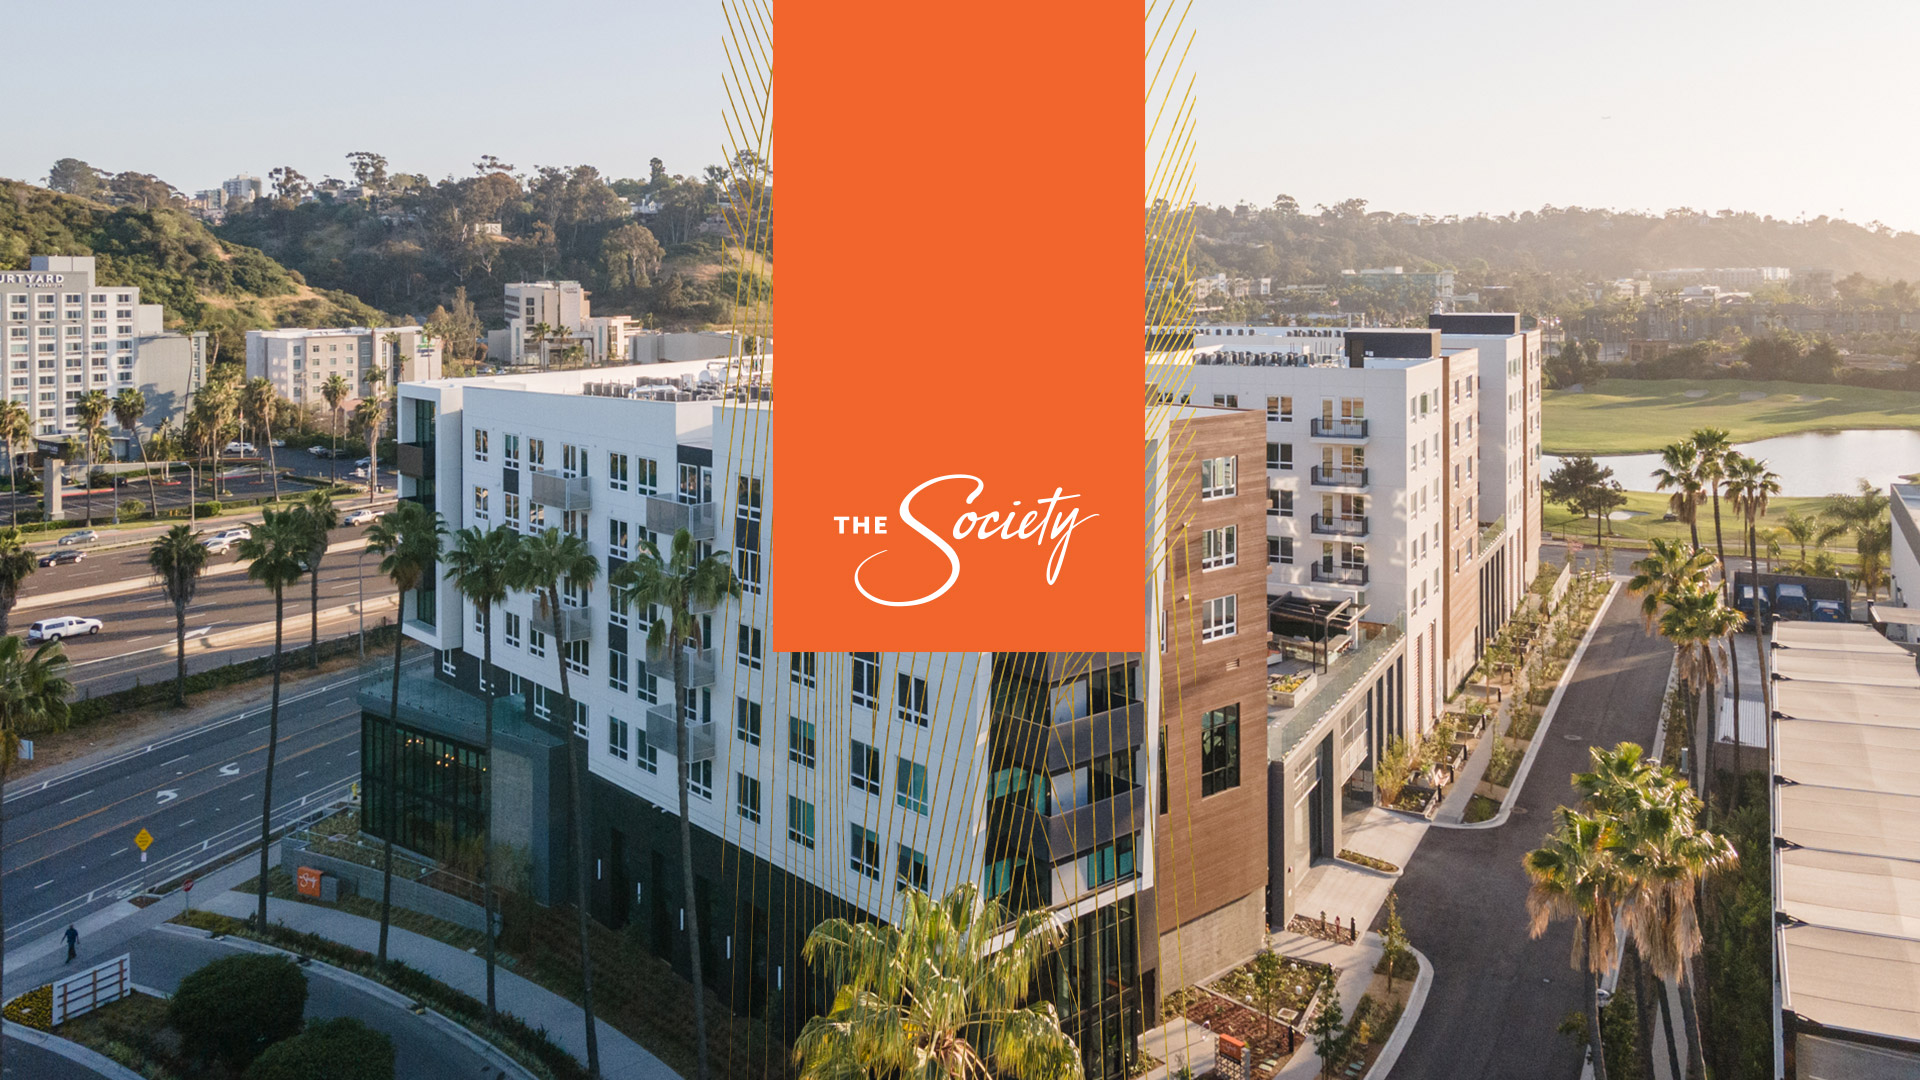 The Society apartments in San Diego Logo and brand design